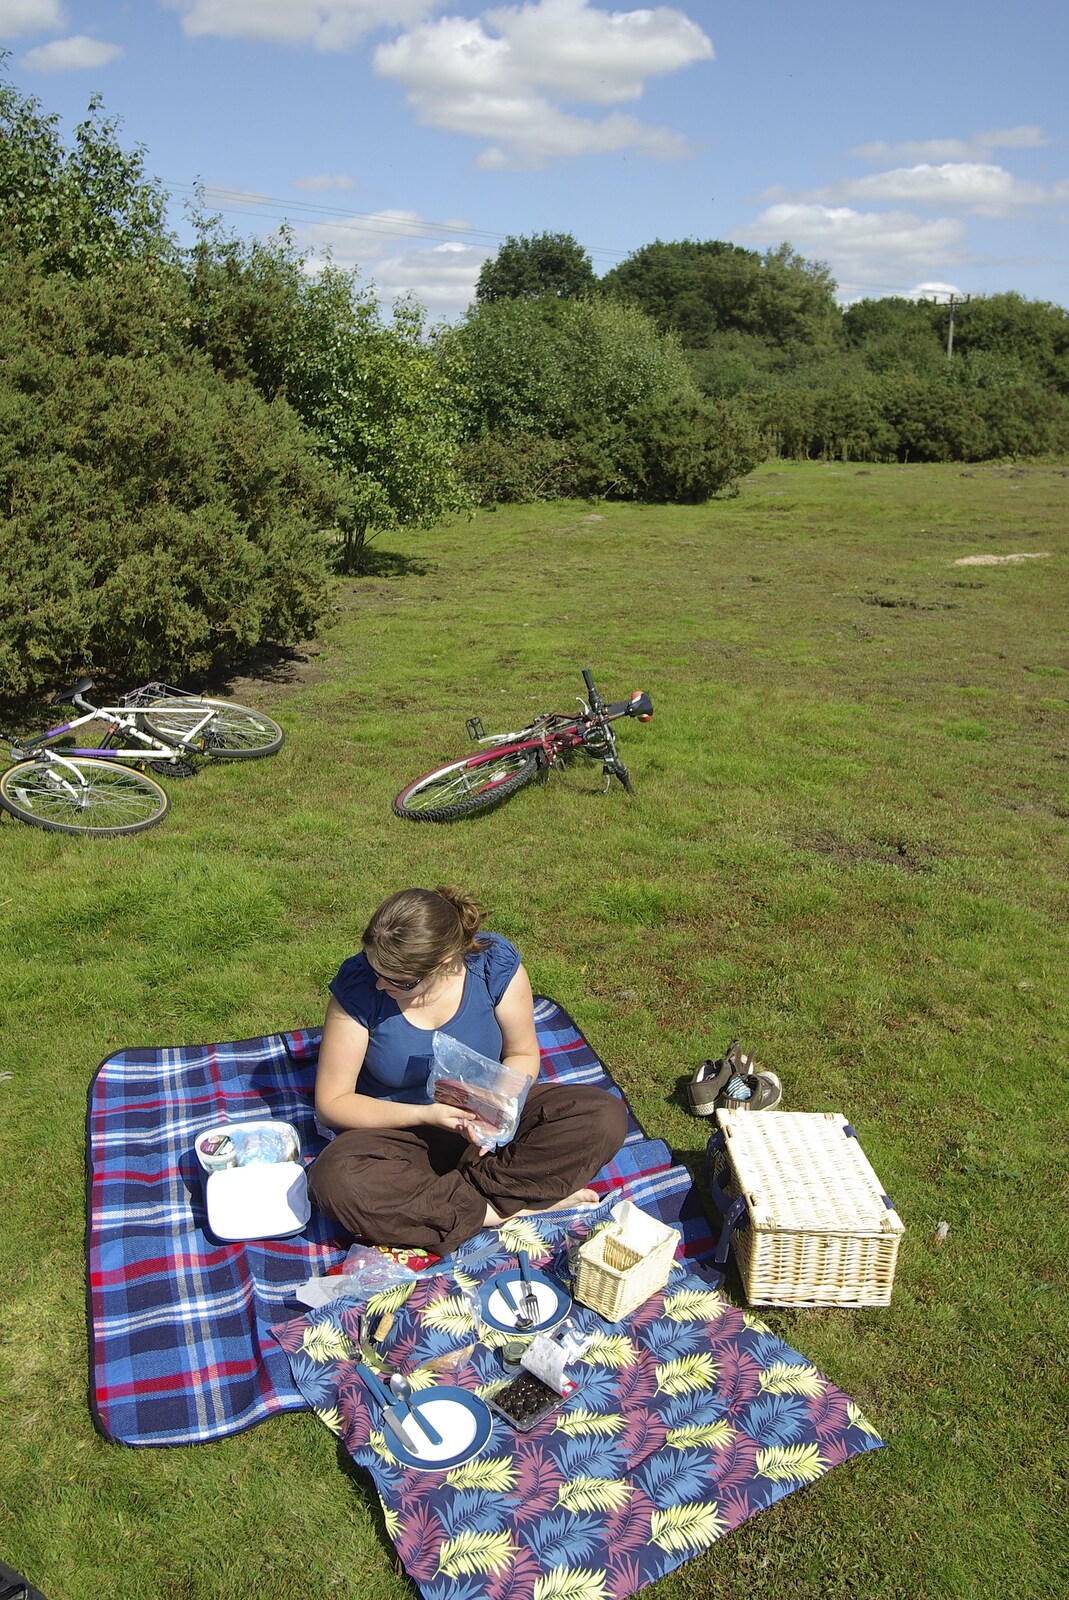 Picnic blankets and bikes from A Picnic on The Ling, Wortham, Suffolk - 26th August 2007